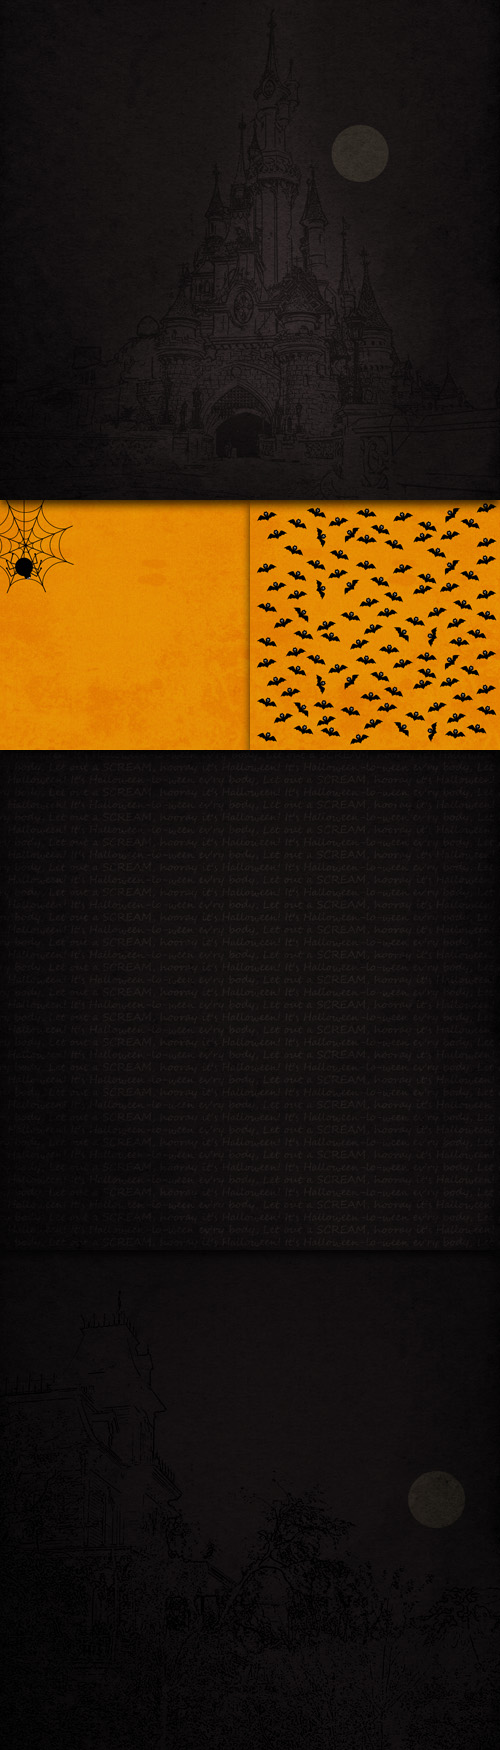 Fall For You - Halloween Backgrounds